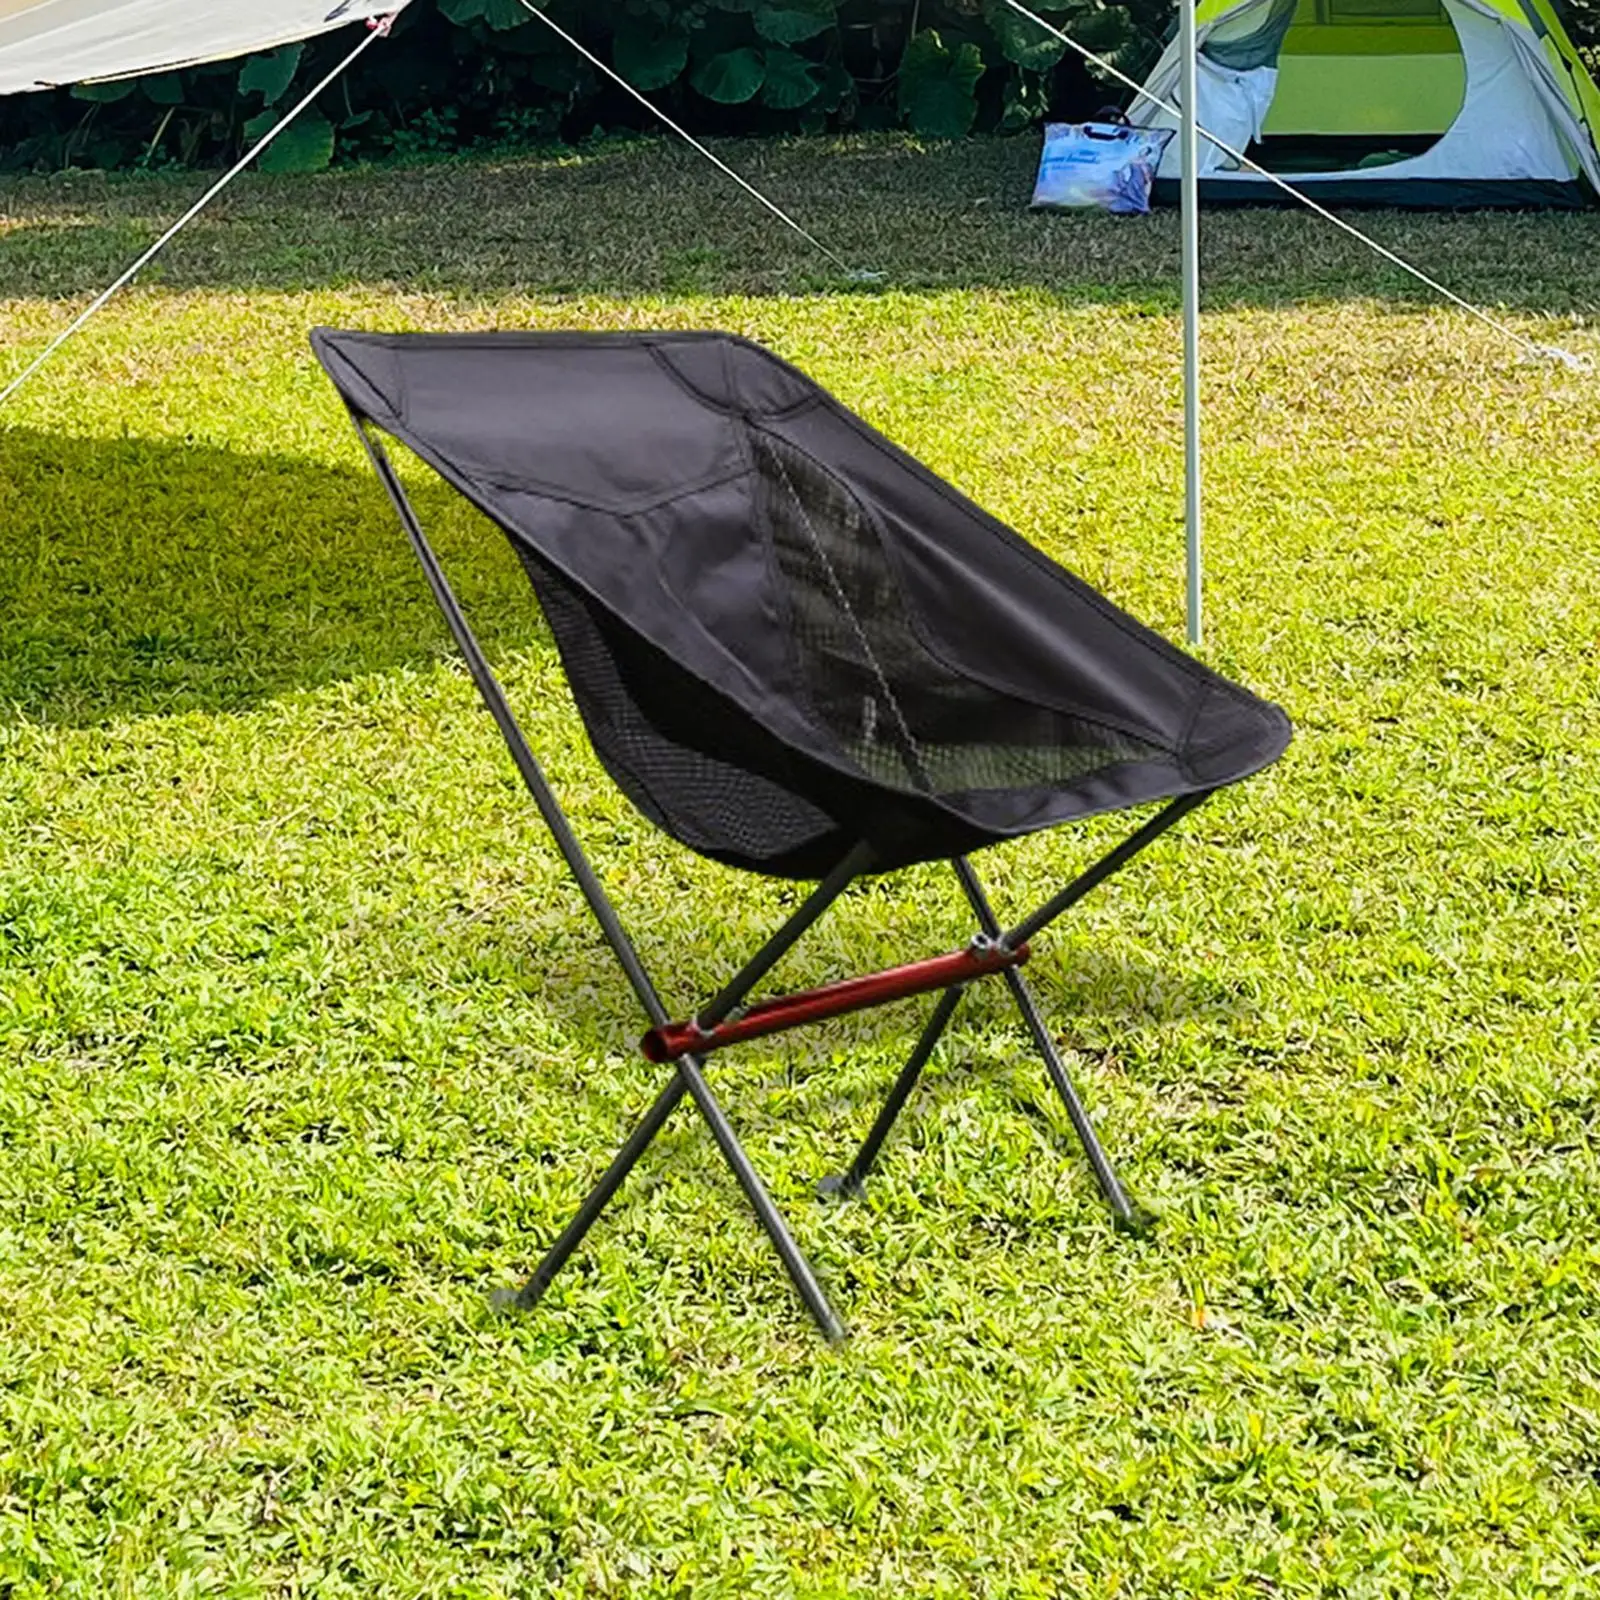 Folding Camping Chair Collapsible Folding Chair for Hiking Yard Garden